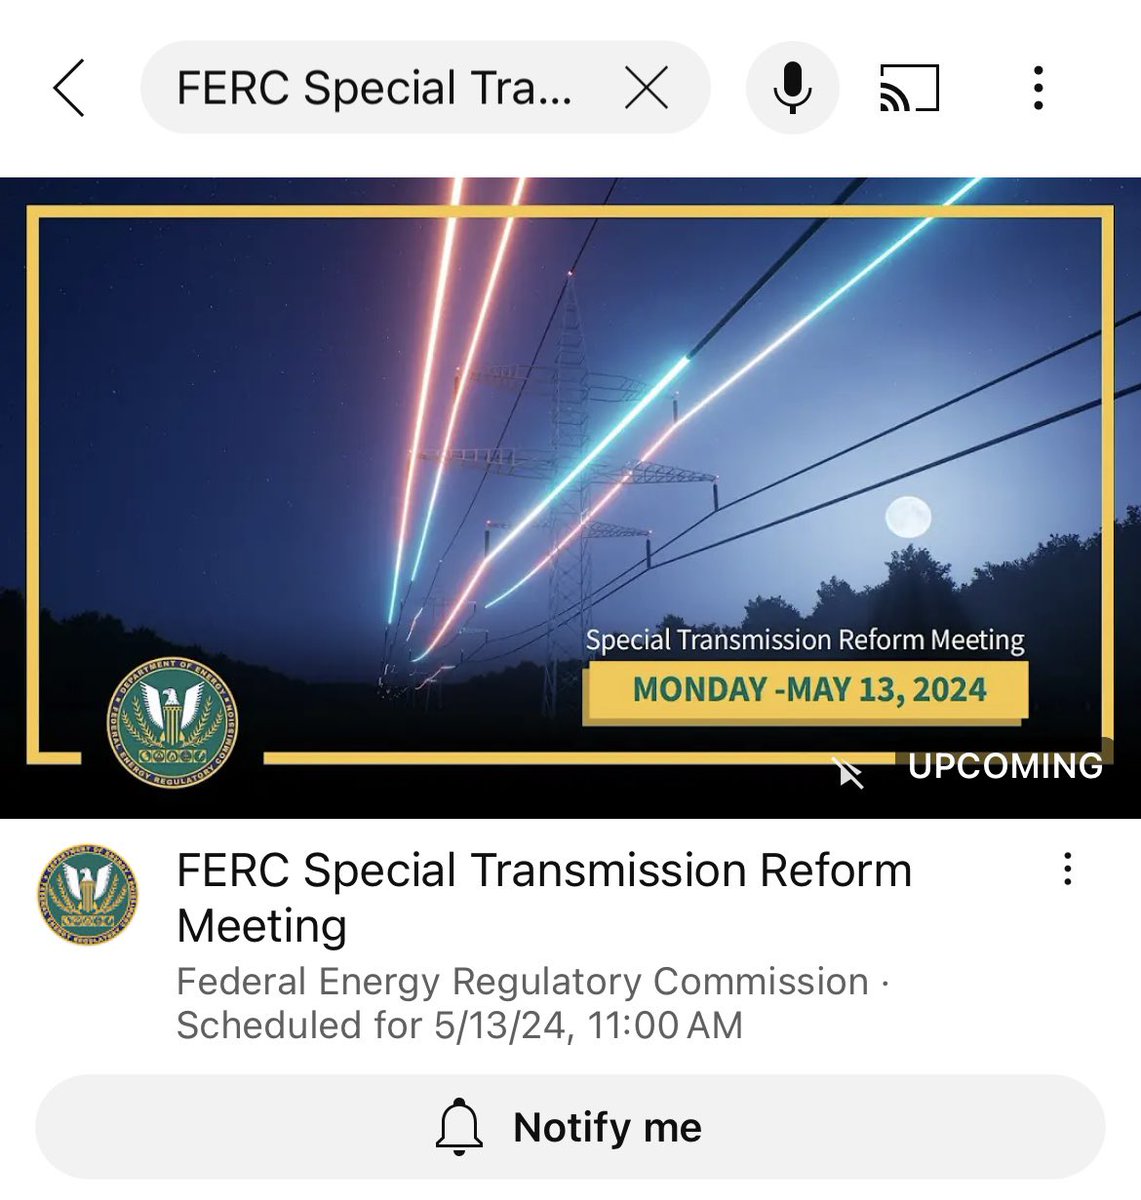 For those who imbibe… Special FERC Transmission Reform Meeting will be broadcast live on YouTube.